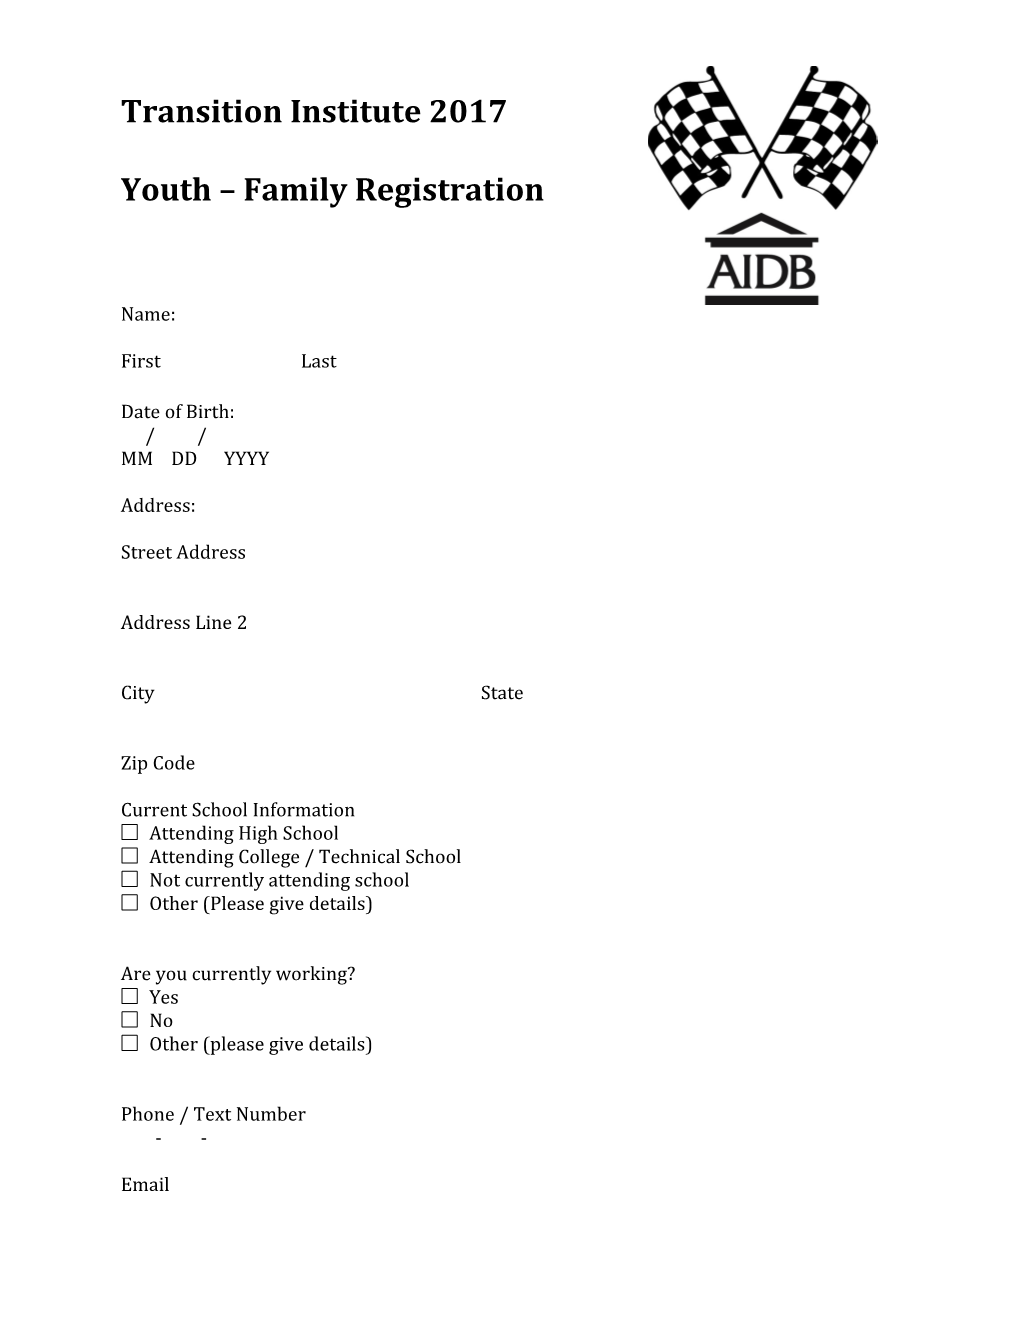 Youth Family Registration